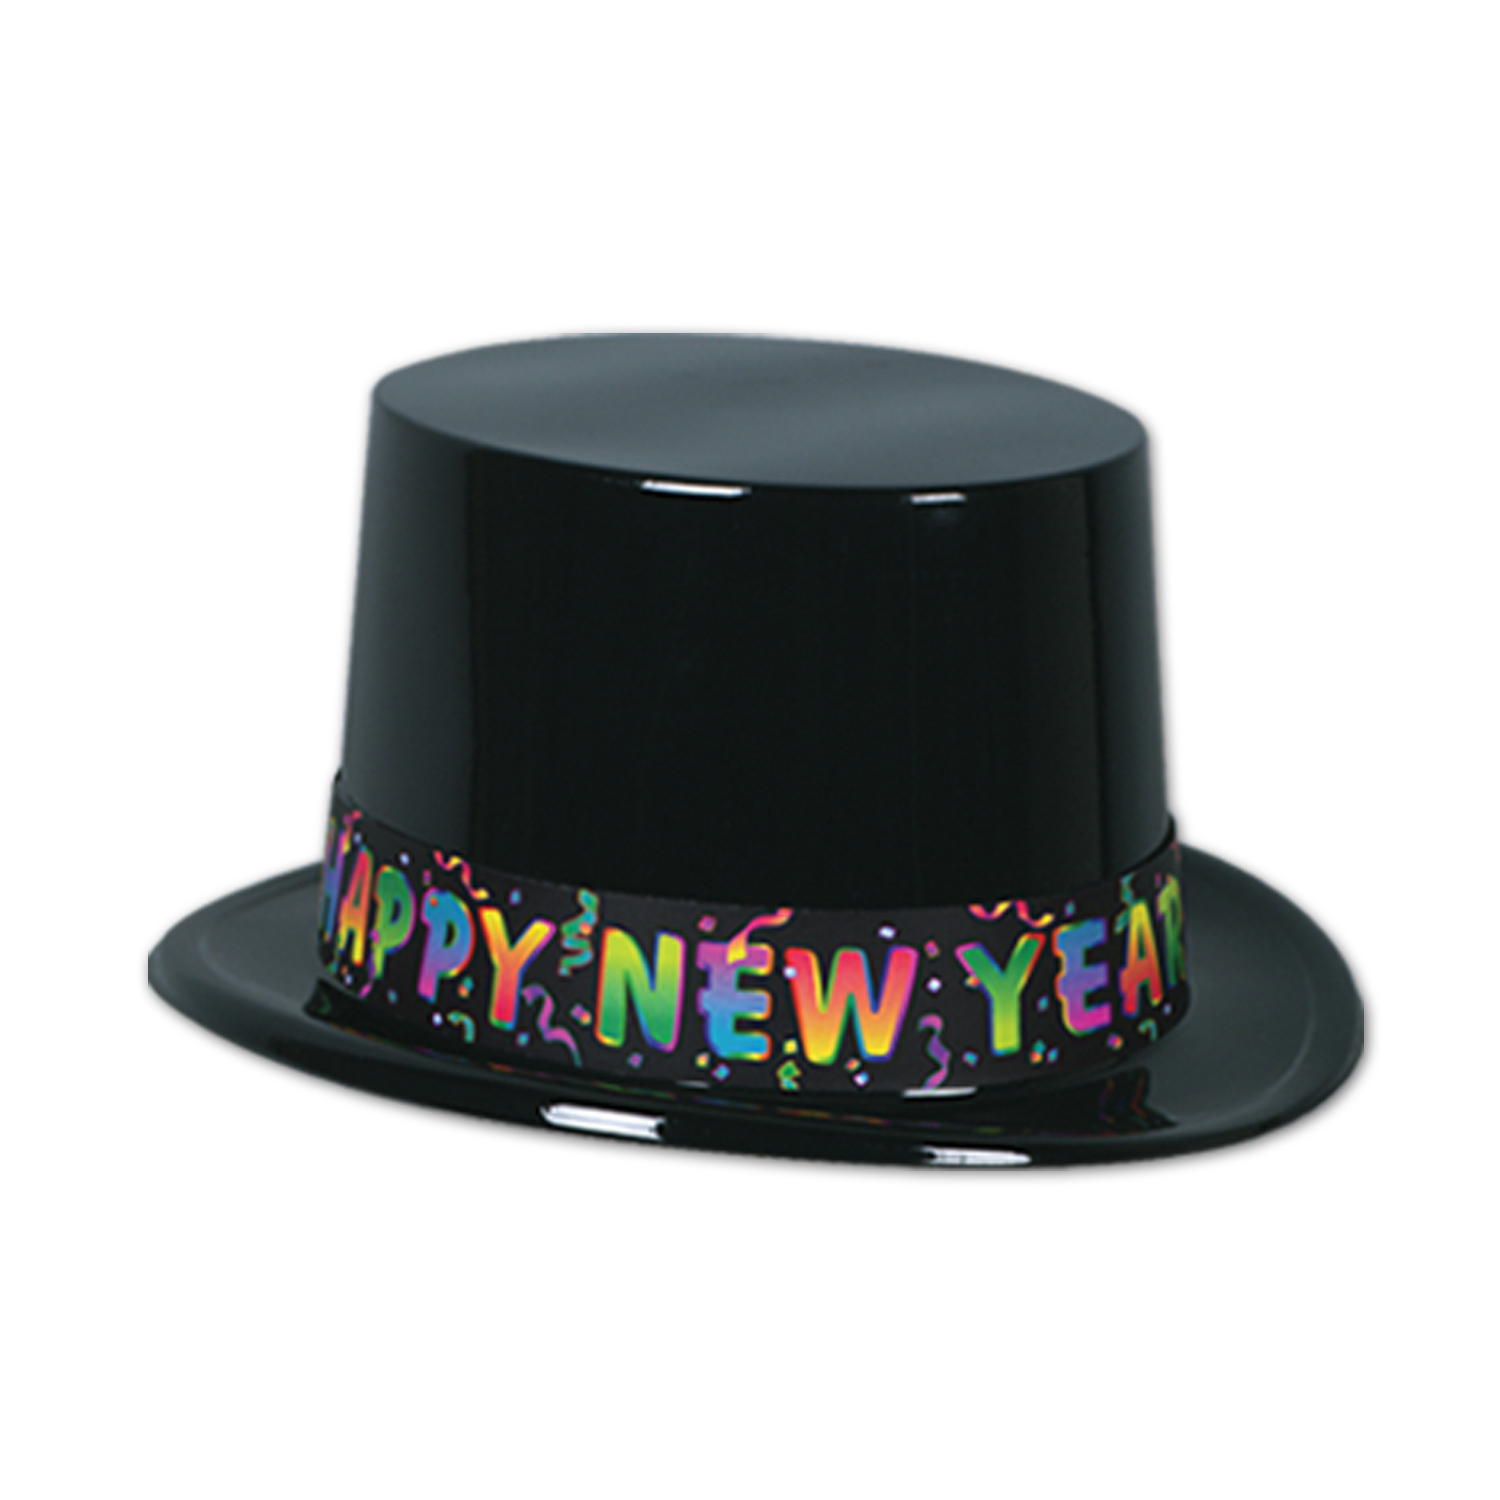 Black plastic topper with a band filled with vibrant confetti and words that reads "Happy New Year".